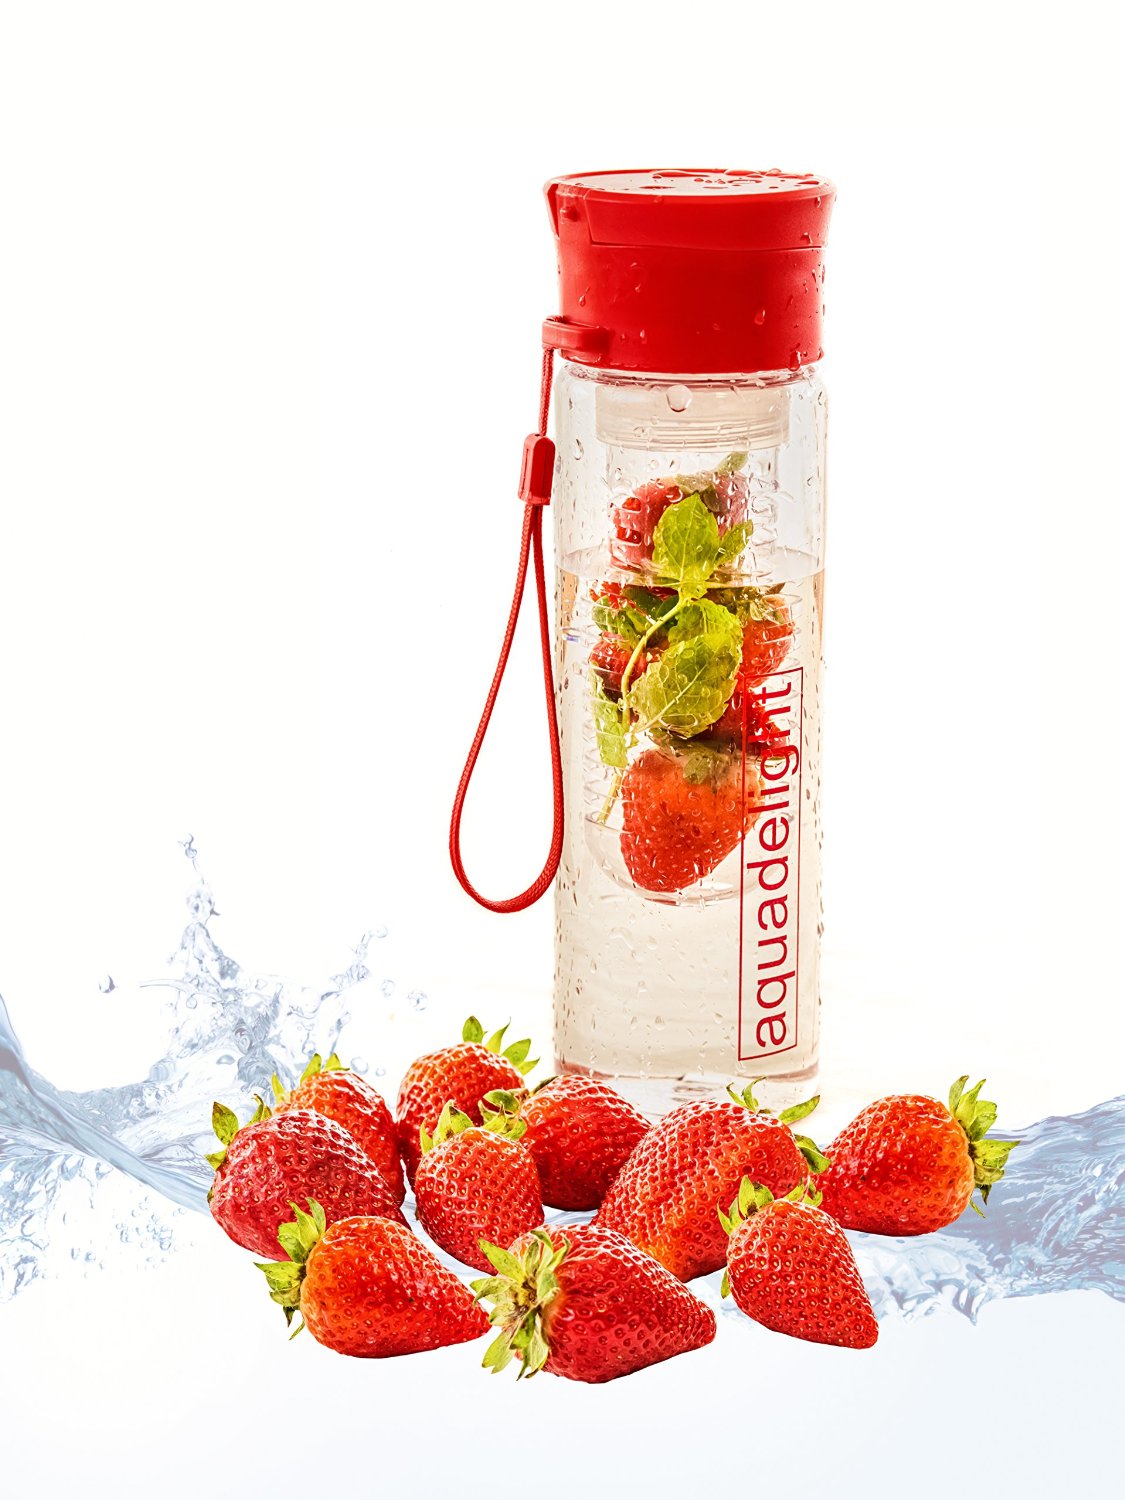 Water bottle review: Aquadelight Infuser